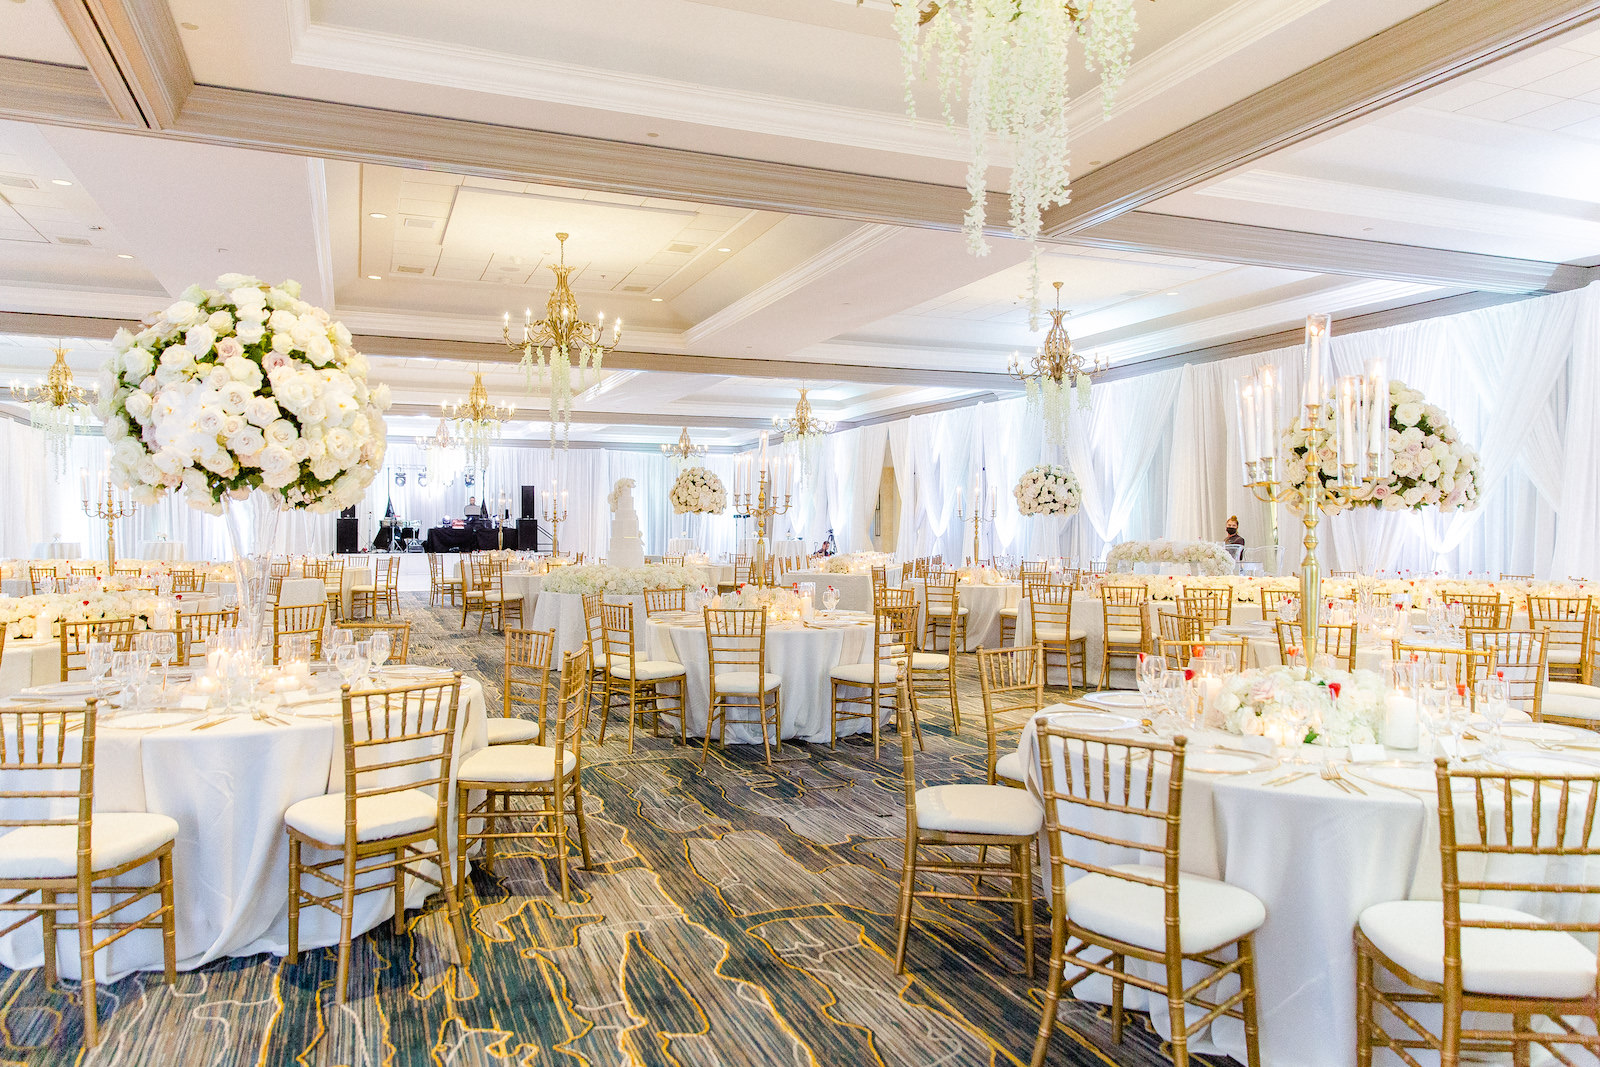 Romantic Elegant White and Gold Wedding, Gold Chiavari Chairs, Tall All Whit3e Floral Bouquets with Roses, Hydrangeas, Hanging White Florals on Chandeliers, White Linen Draping | Tampa Bay Wedding Florist Botanica International Design Studio